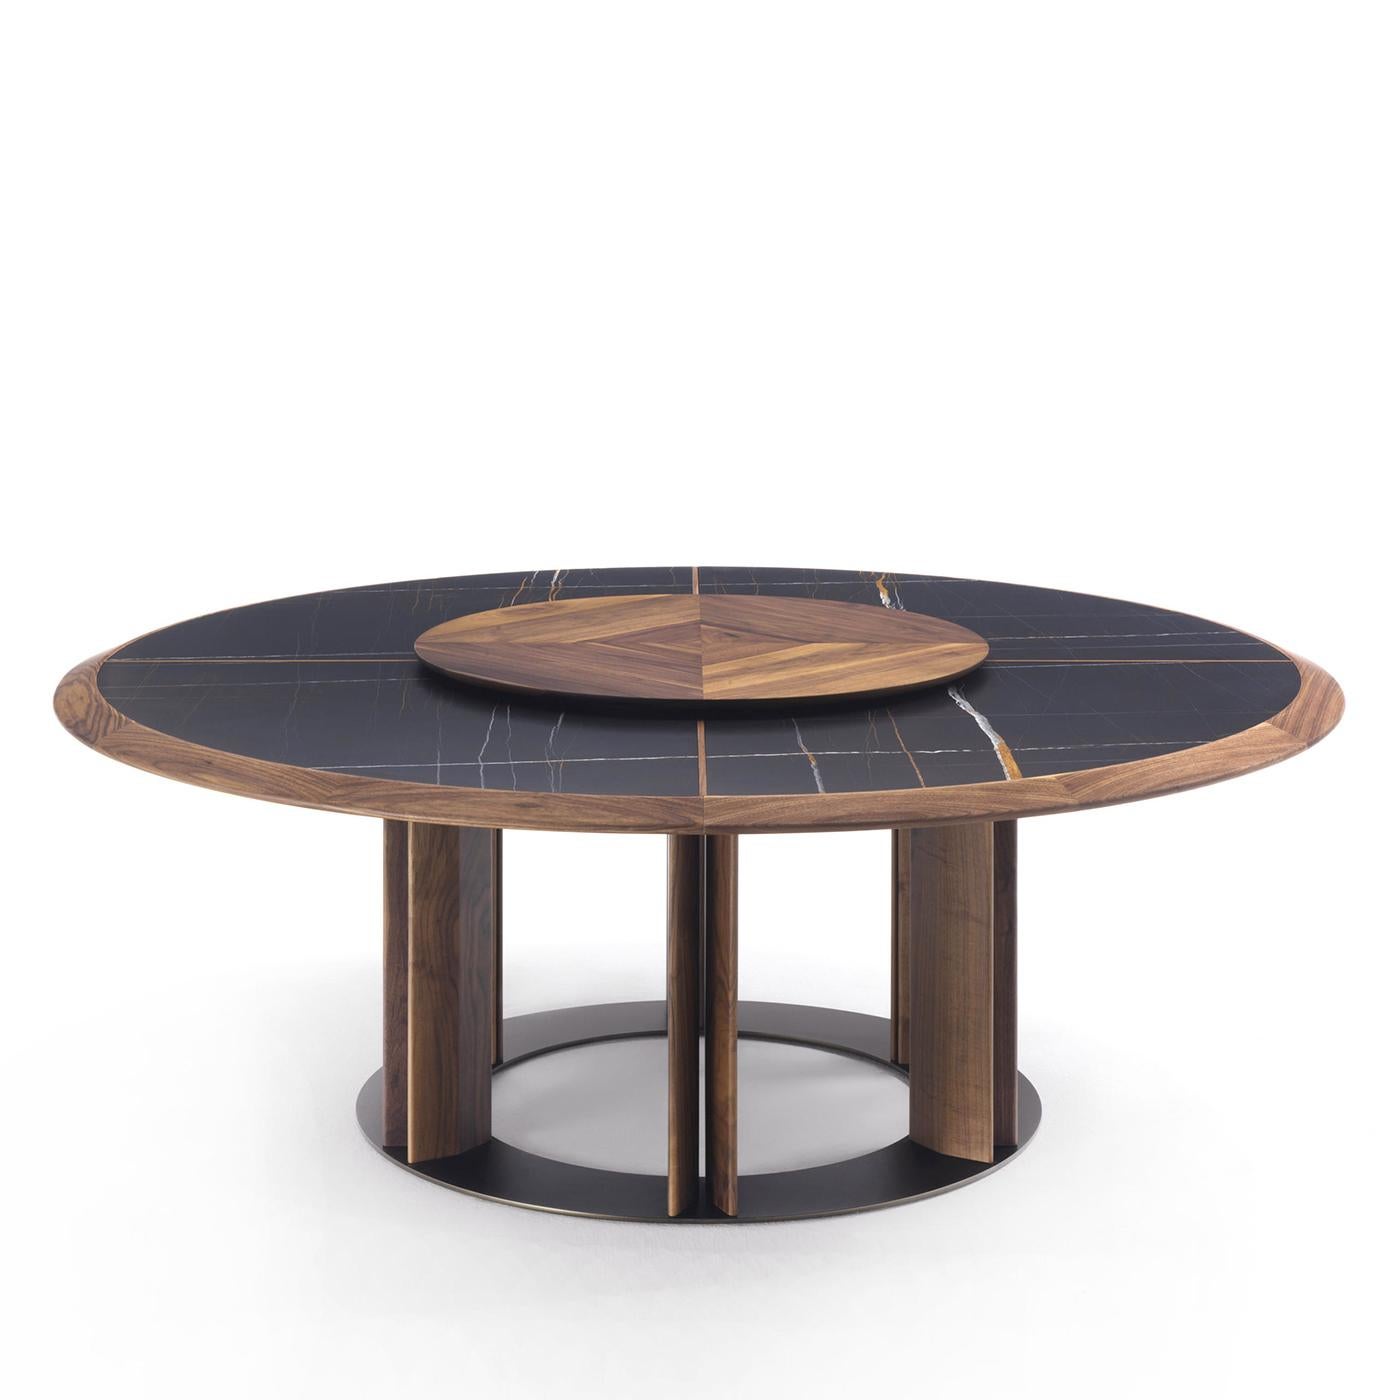 Round dining table Crosby Sahara black with solid walnut 
wood base structure and top frame, with Sahara black marble 
top divided in four parts. With swivel walnut wood round tray.
Available in:
Diameter 160cm x Height 74cm, price: